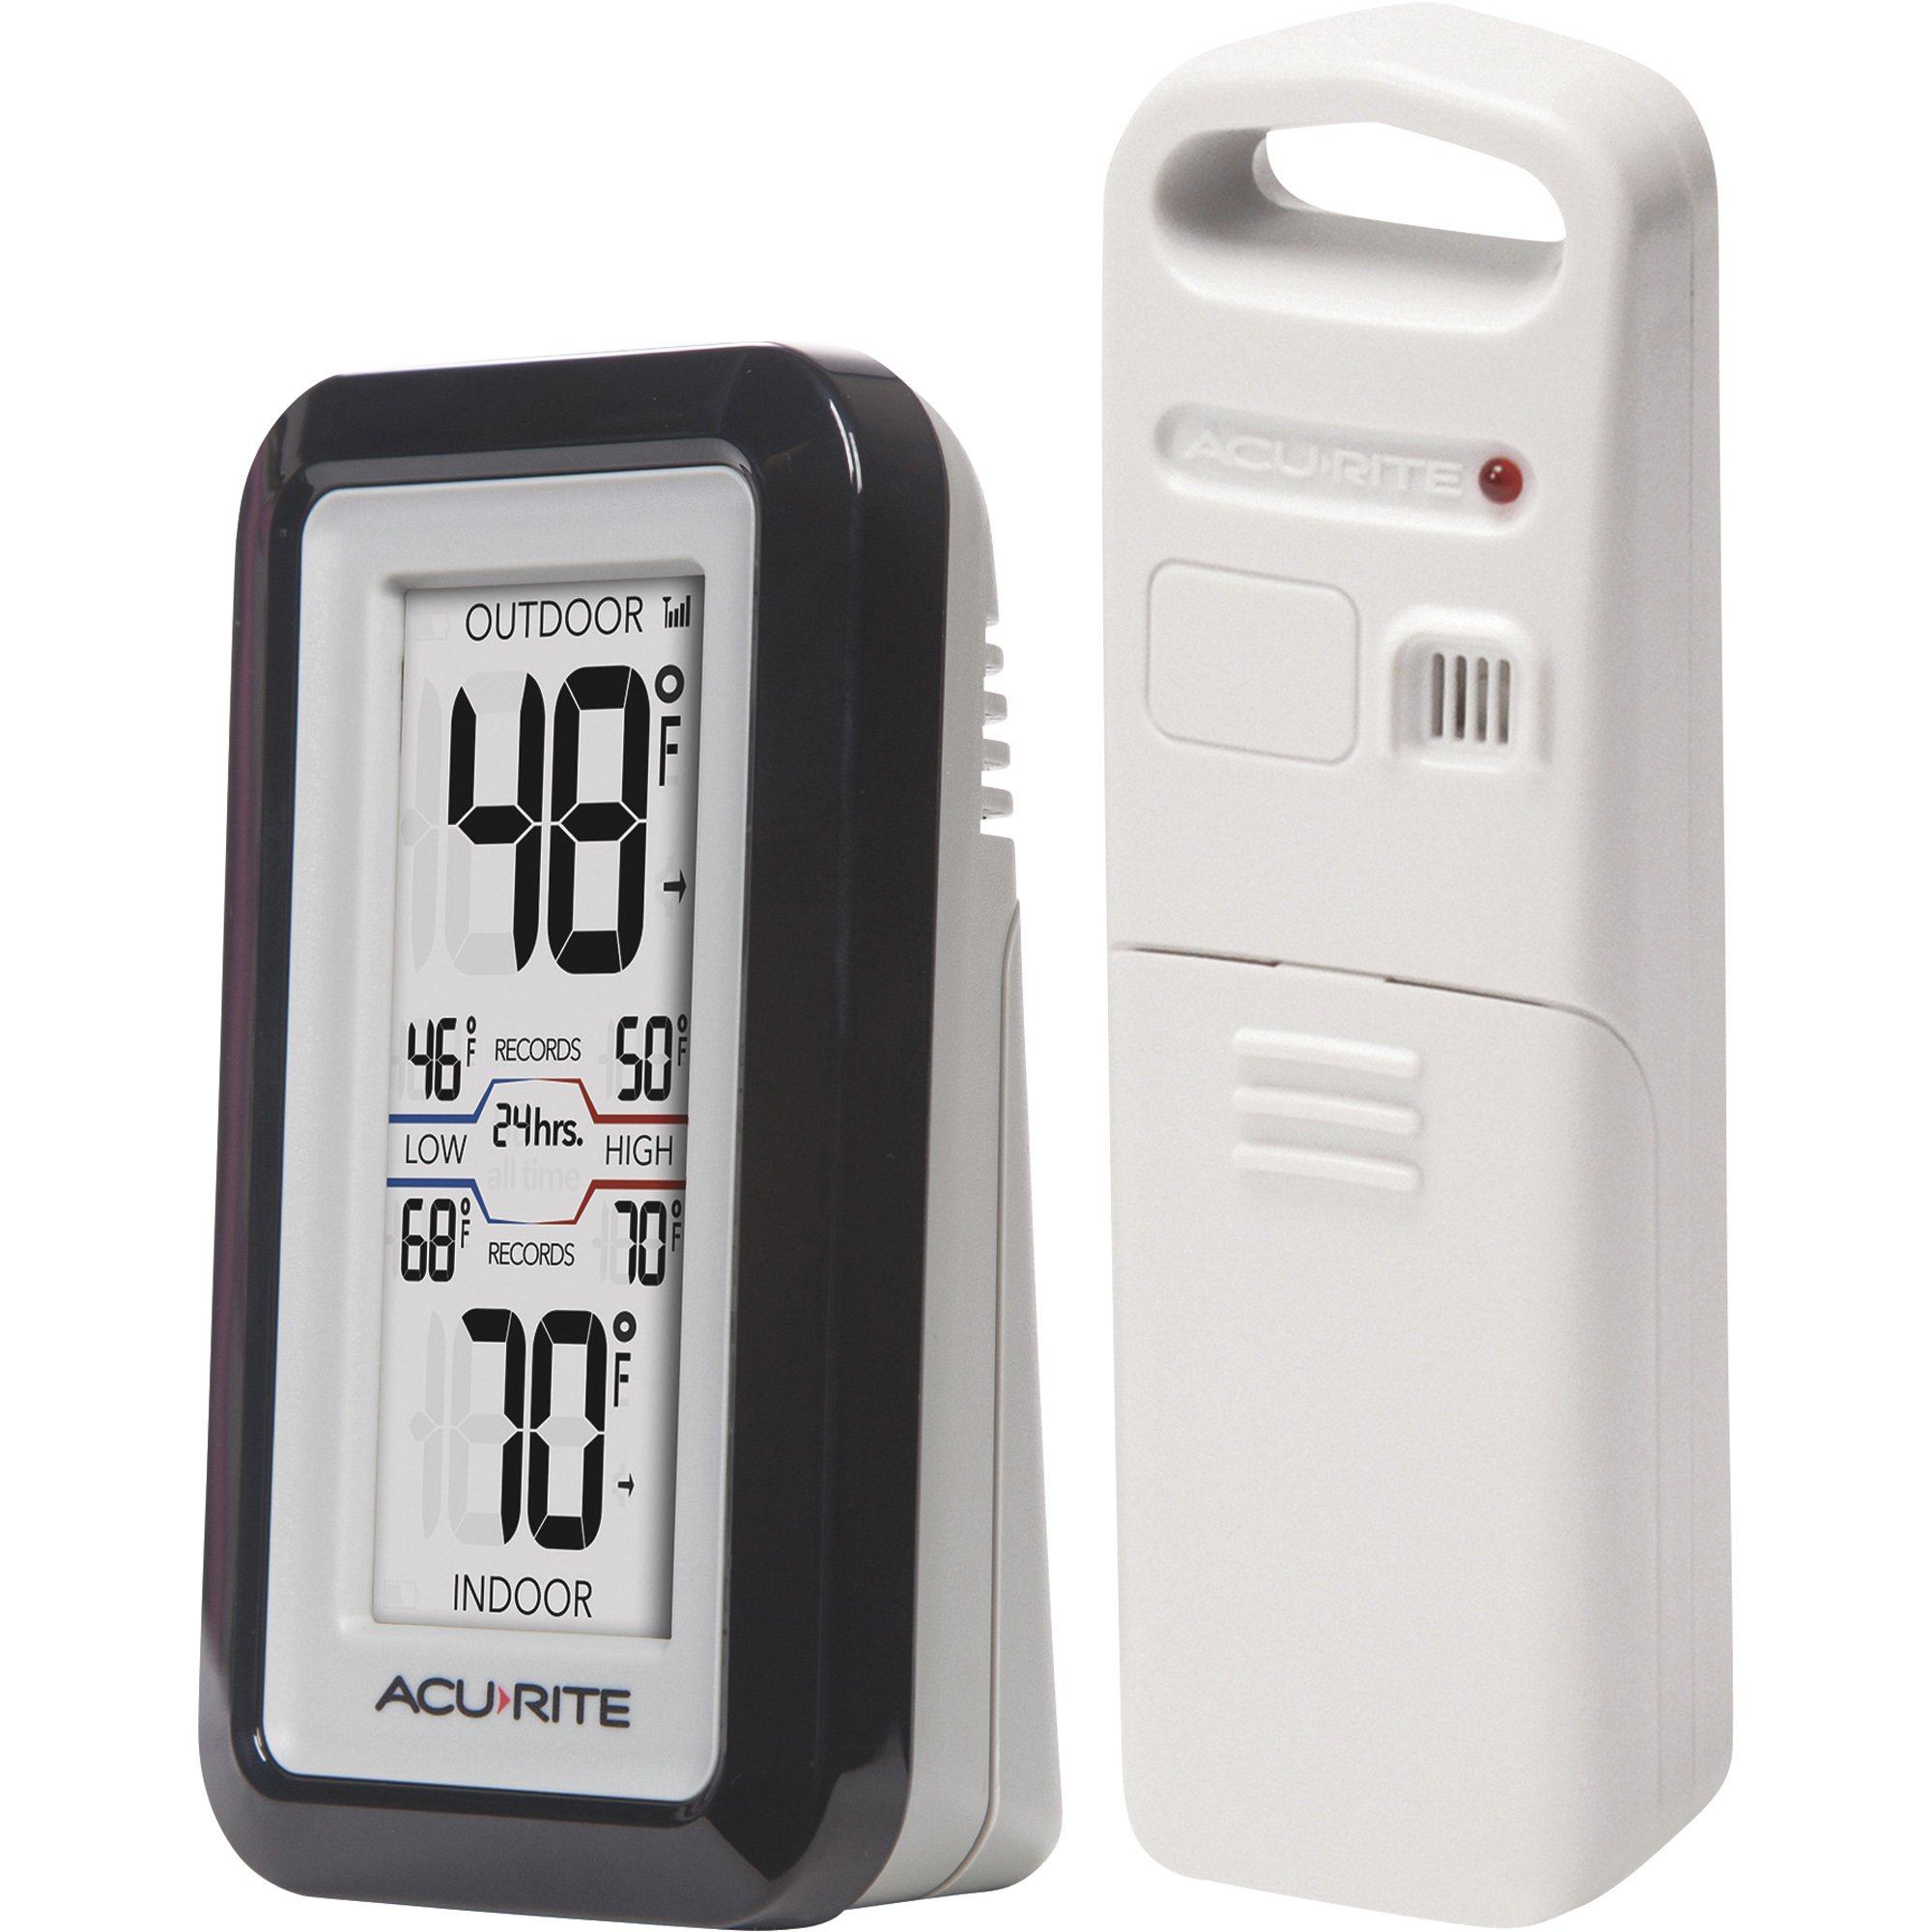 AcuRite Digital Indoor/Outdoor Thermometer — Model# 02043A1